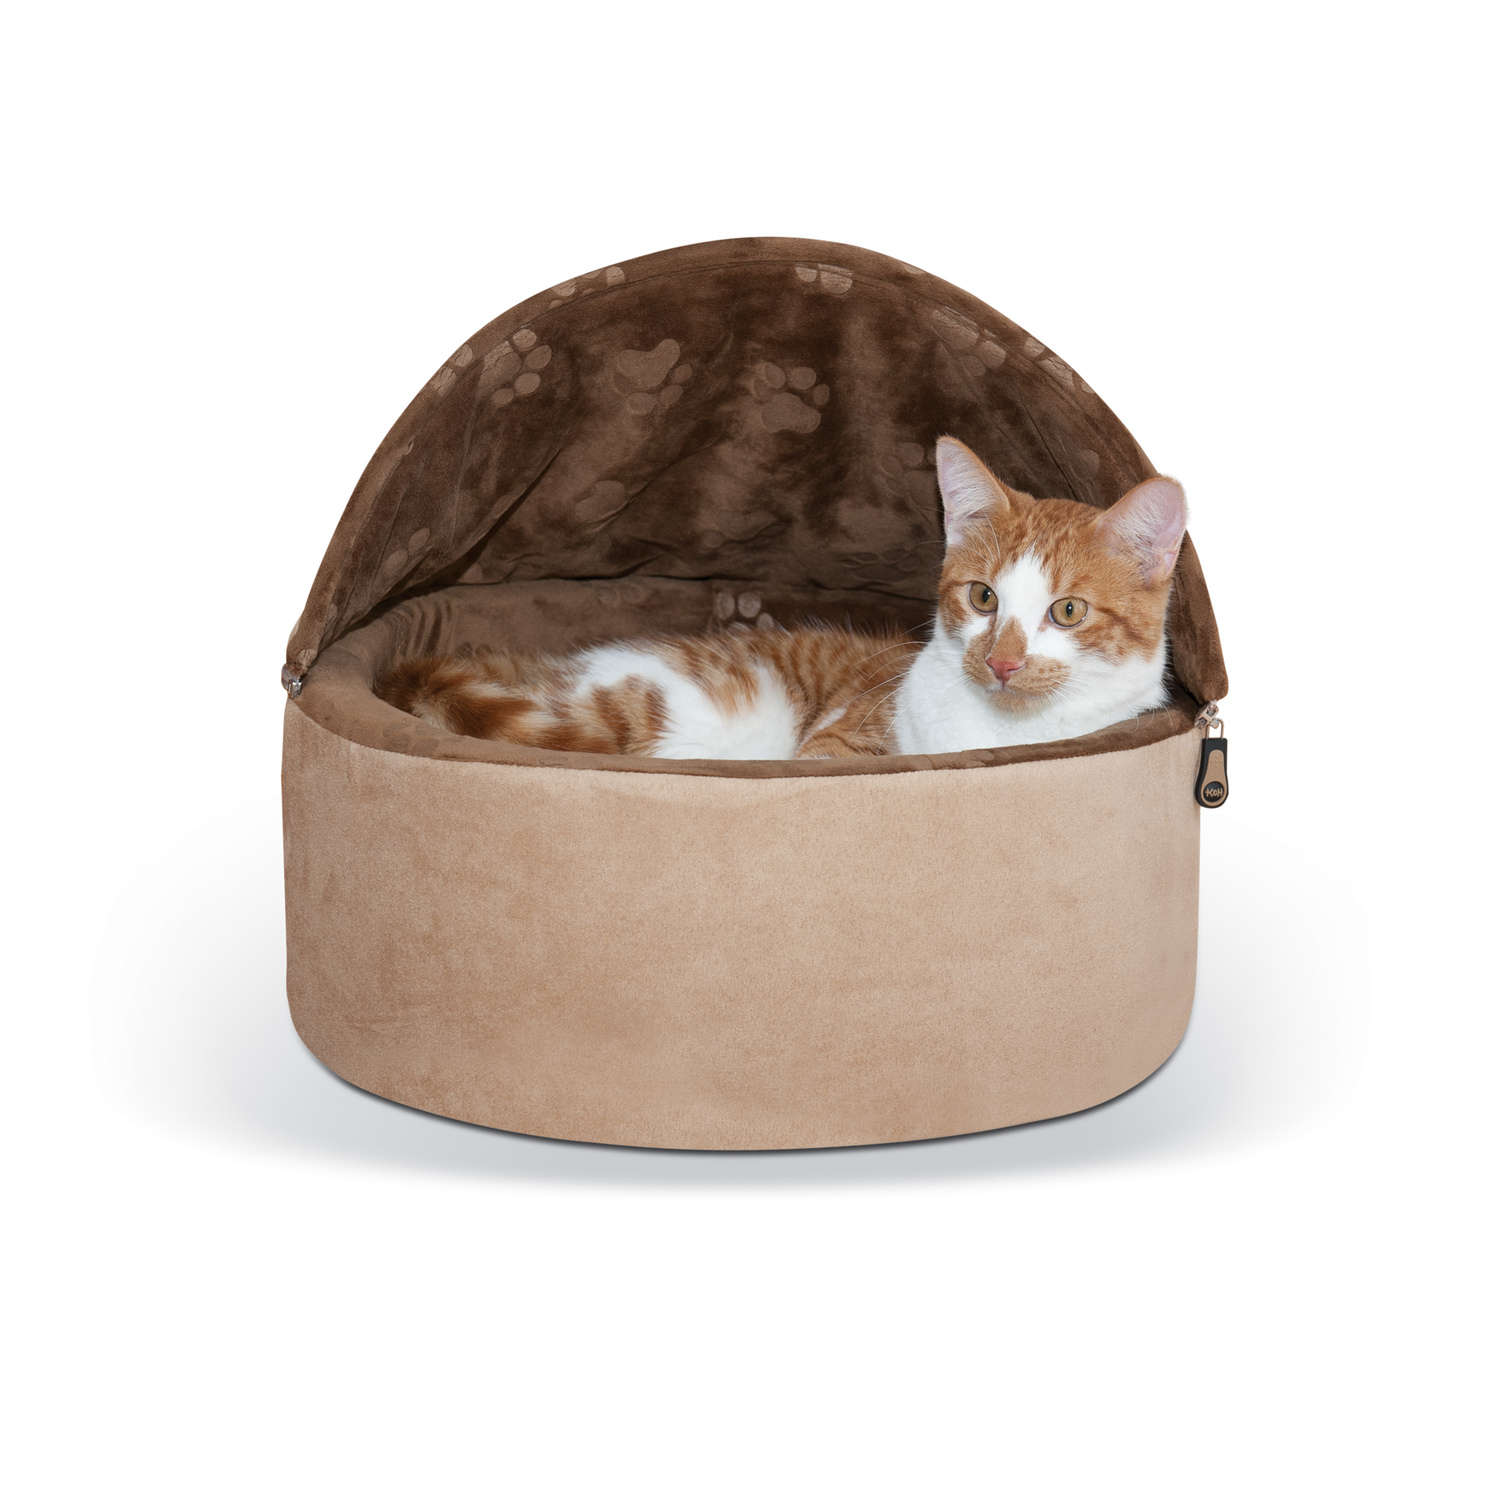 K&h Pet Products Kh2995 Self-warming Kitty Bed Hooded